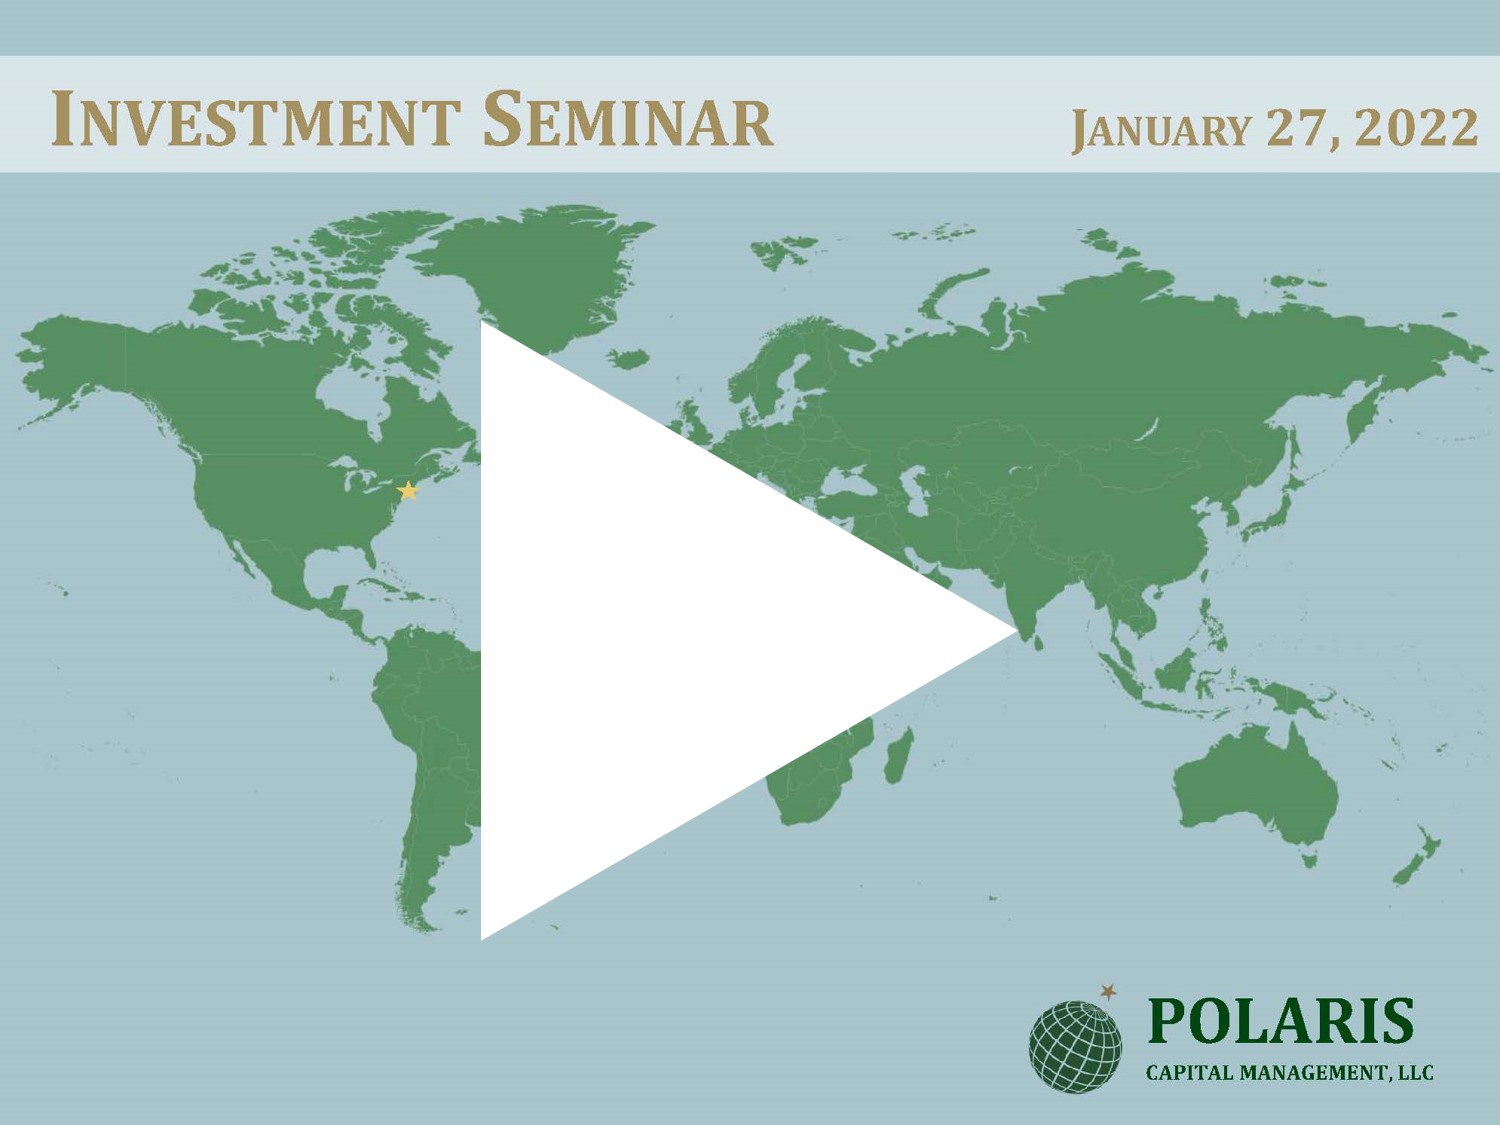 Click here to watch our 2022 Polaris Investment Seminar